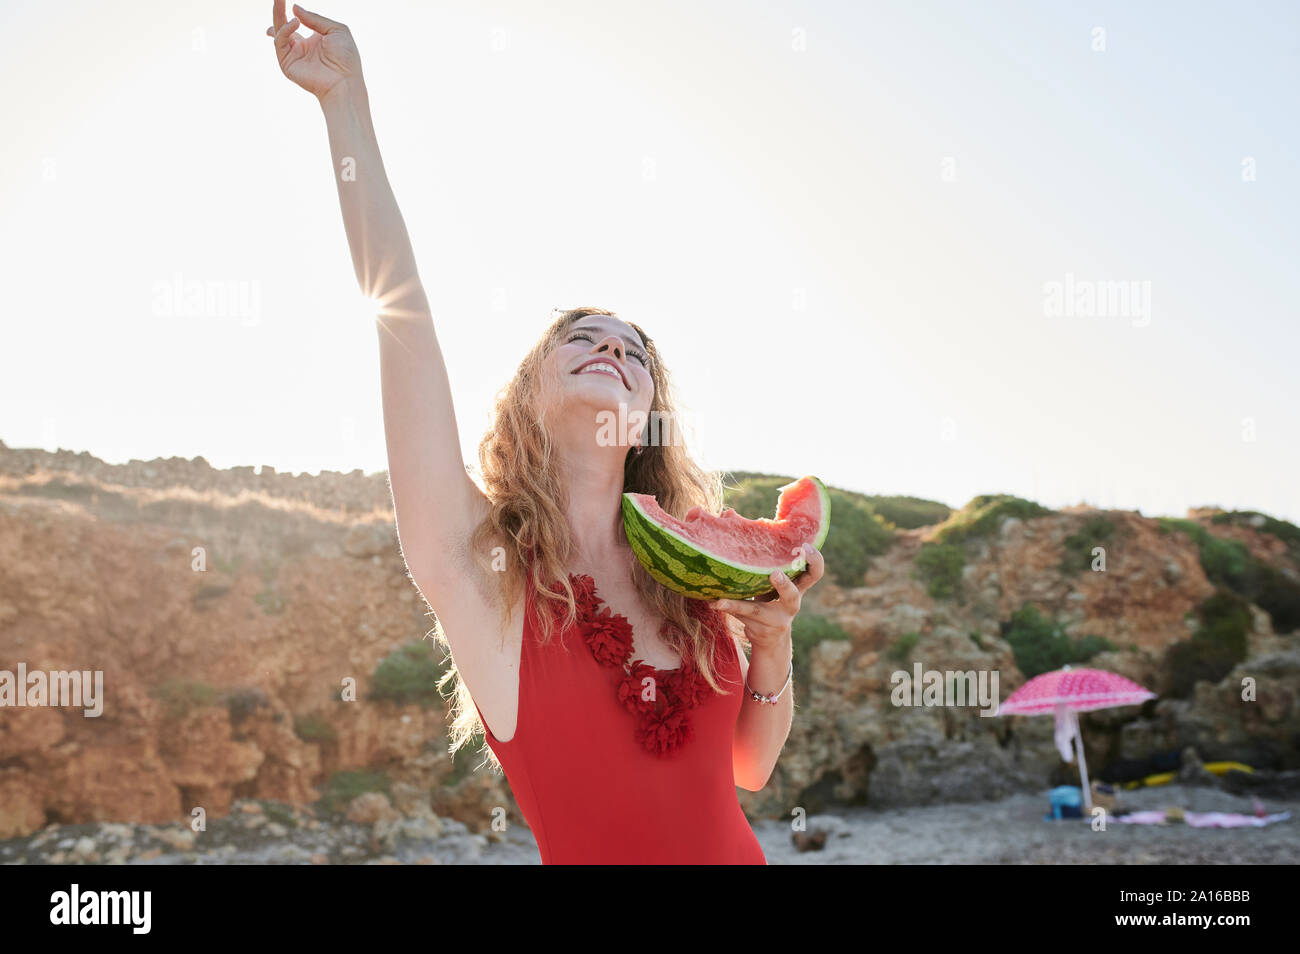 Carefree young woman holding watermelon slice on the beach Stock Photo